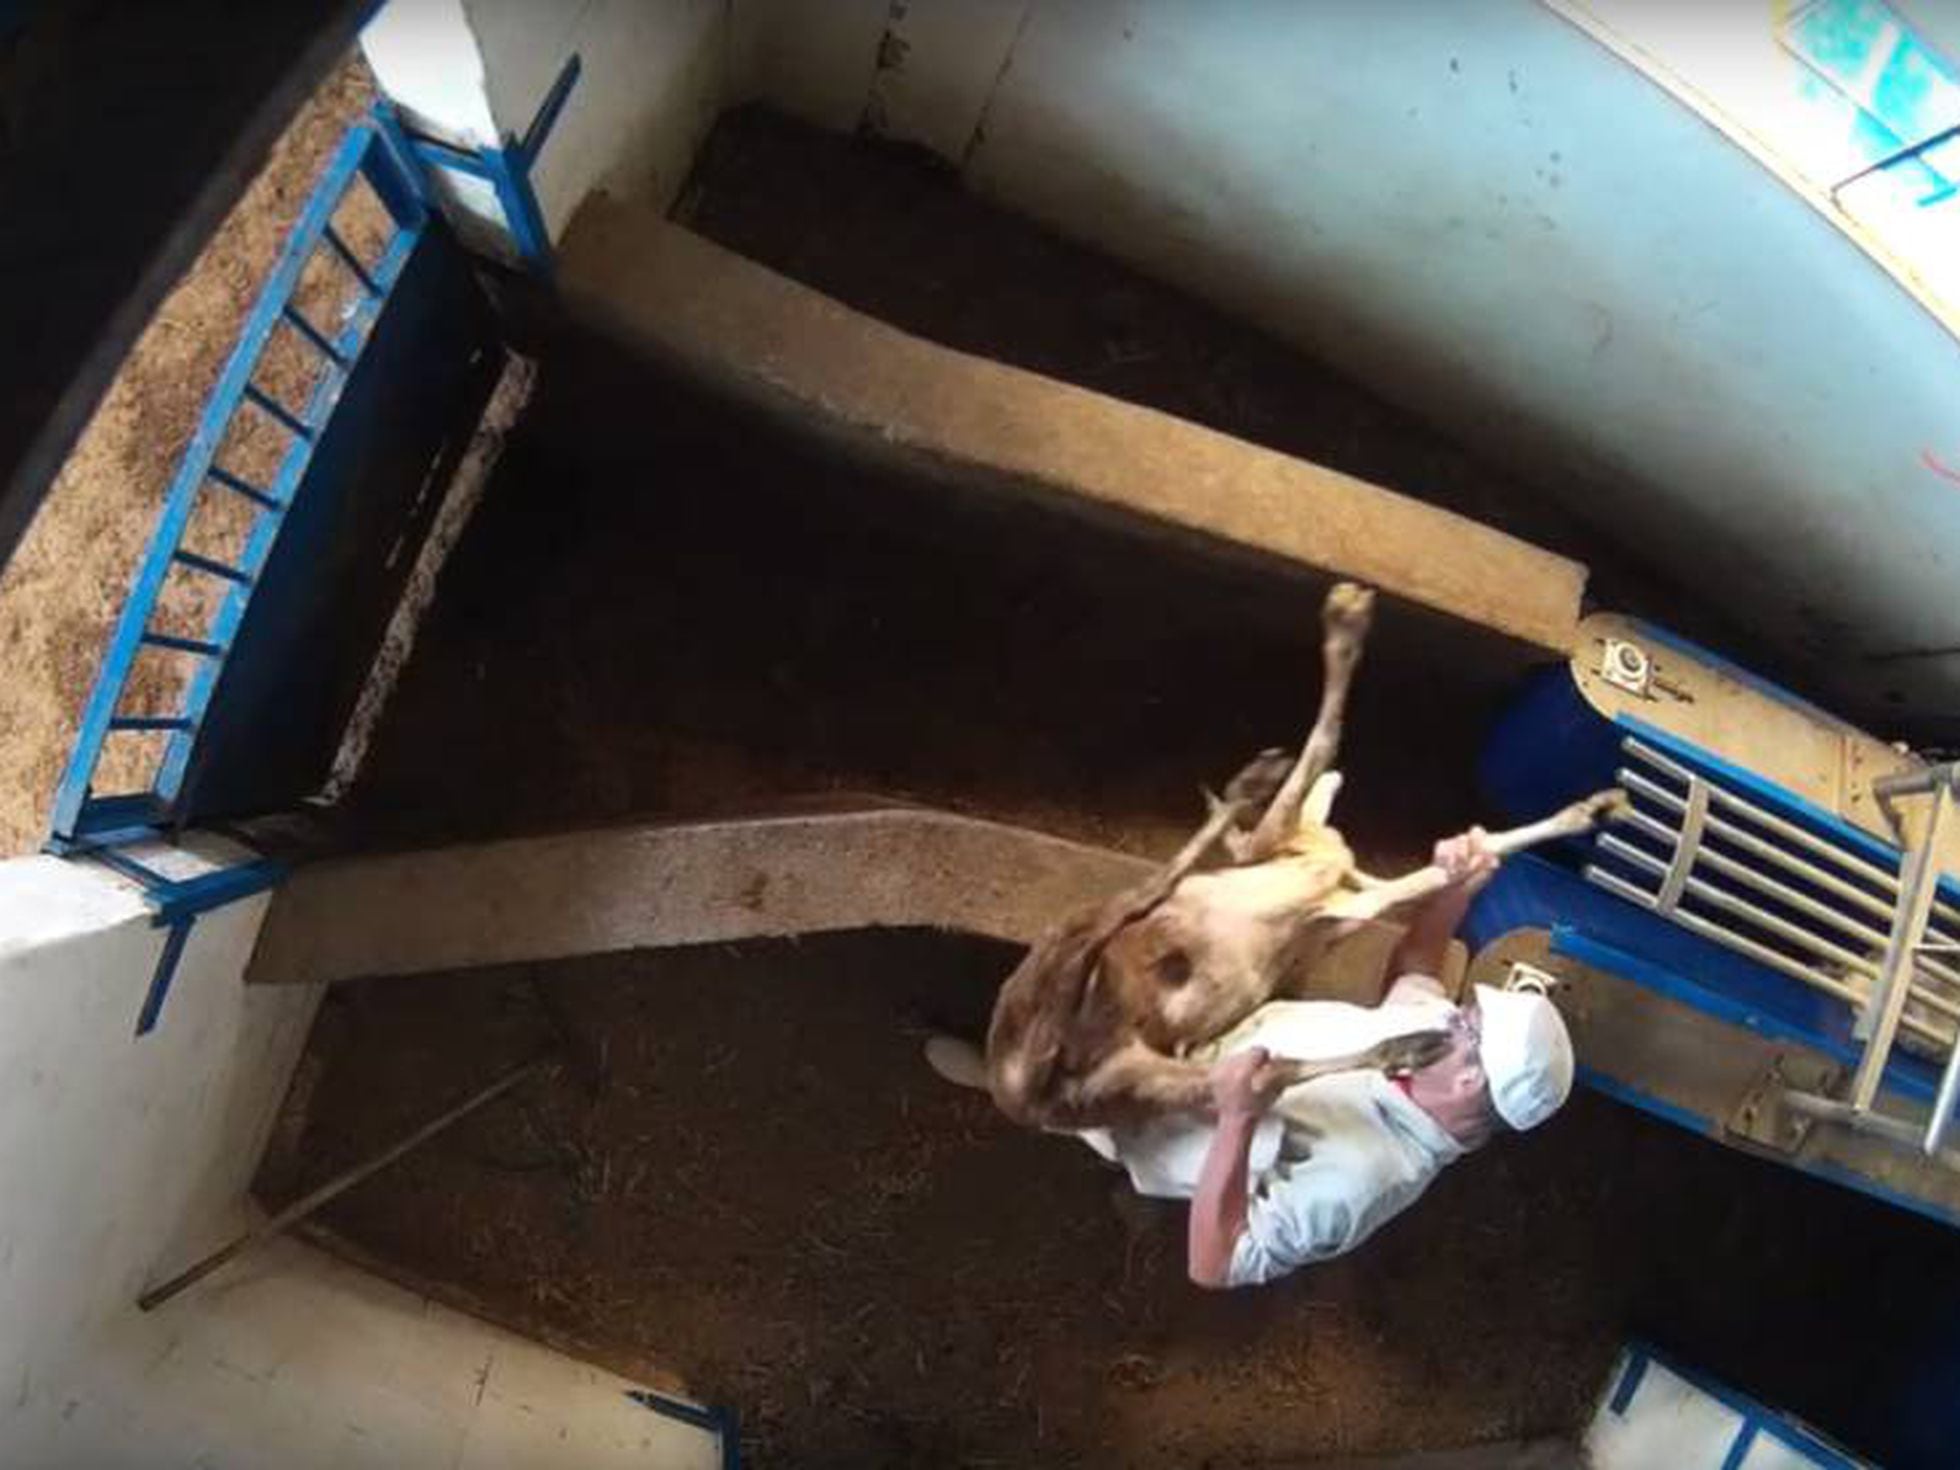 Animal cruelty in Spain: Video: Activists expose shocking animal abuse at  Madrid slaughterhouse | Spain | EL PAÍS English Edition